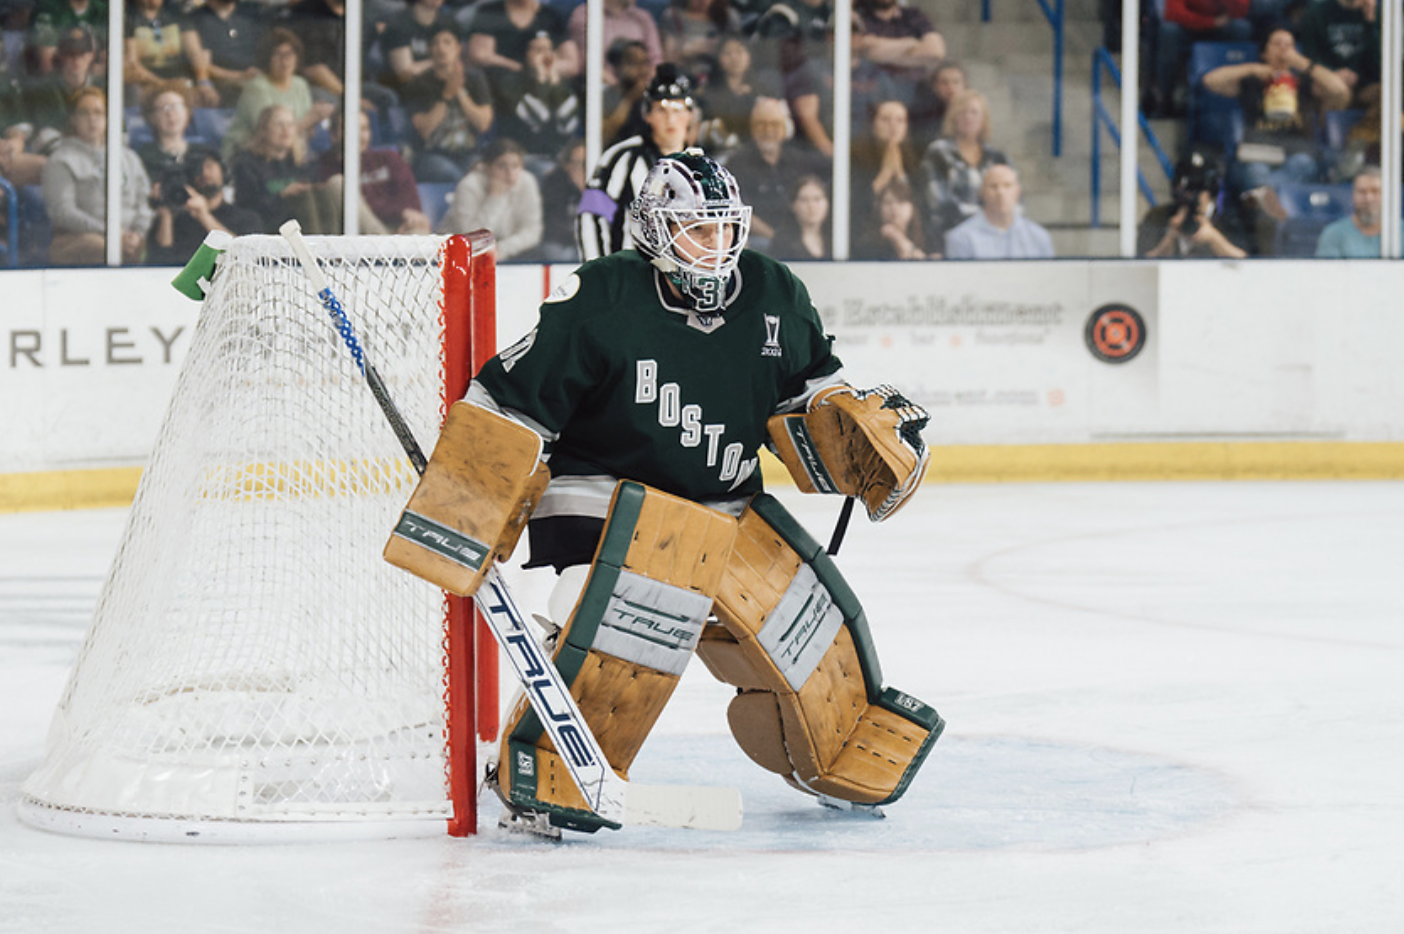 Aerin Frankel stands in her crease, slightly crouched while tracking the puck. She is wearing a green home uniform and her tan pads.